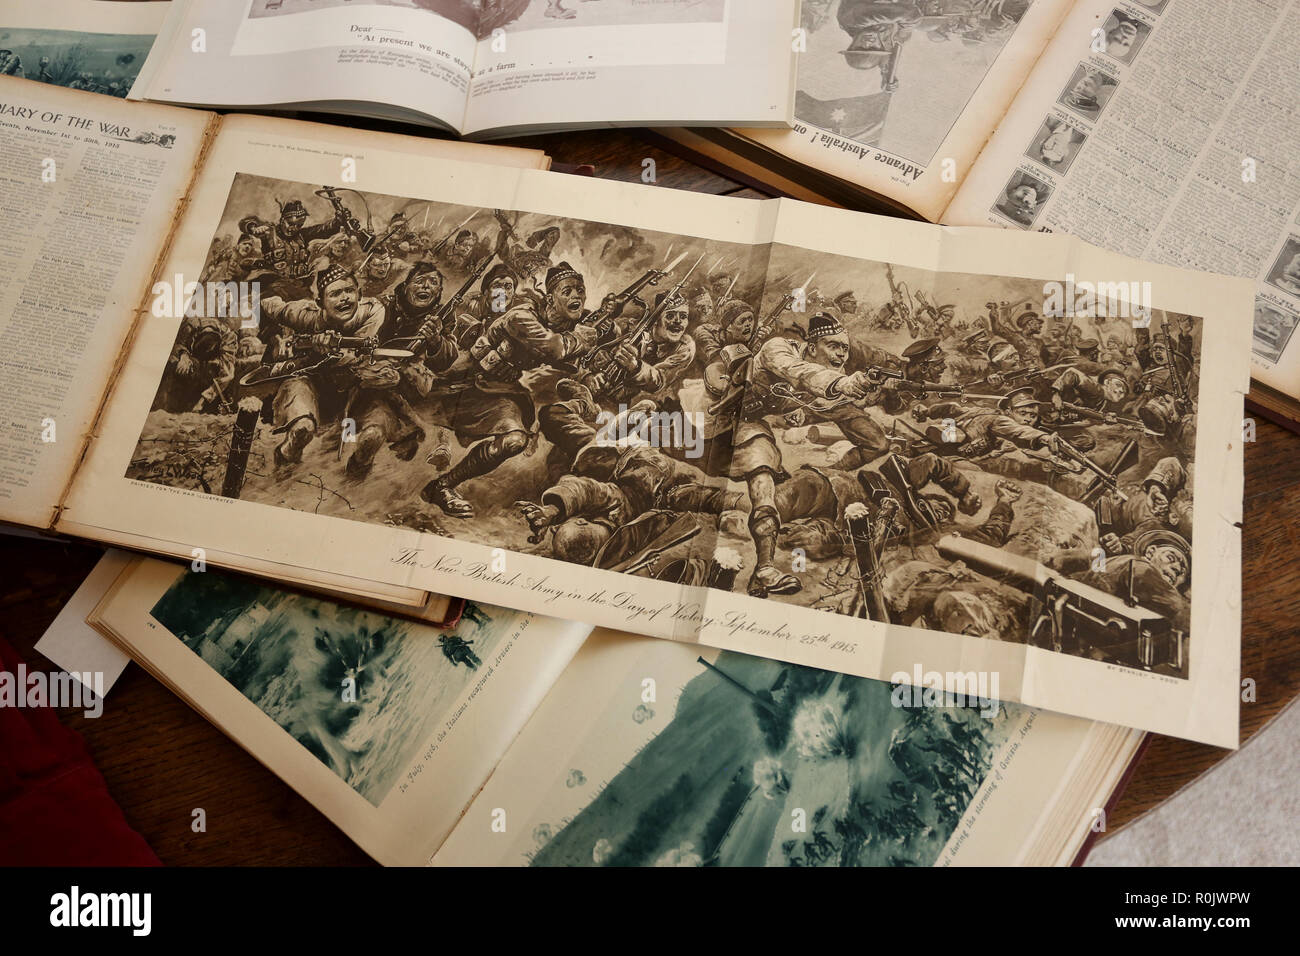 General views of The War Illustrated World War One Books and texts being read by an historian in Sussex, UK. Stock Photo